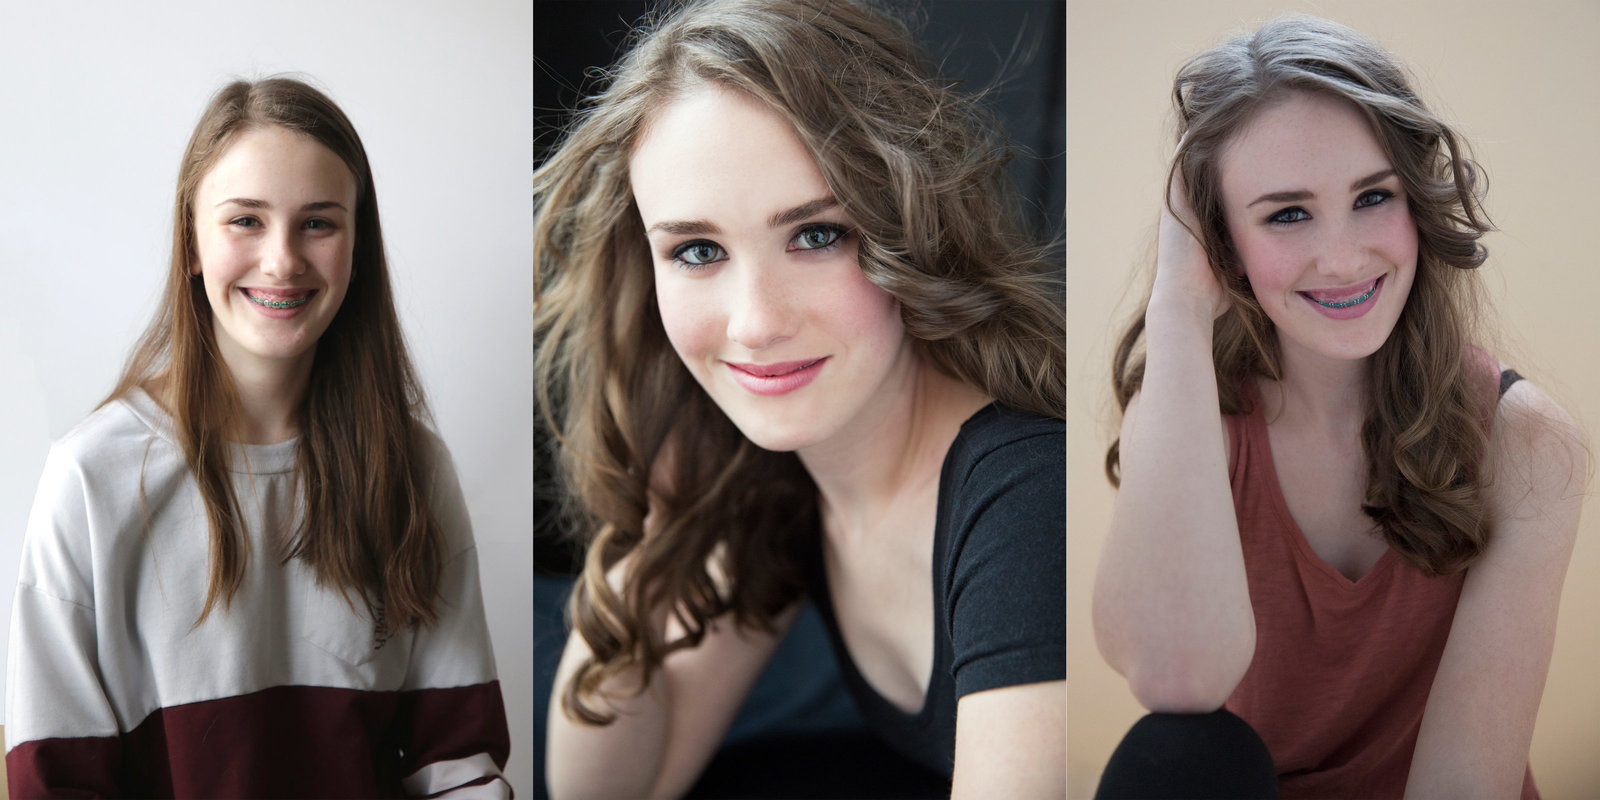 Nashville Glamour Portrait Photography before and after